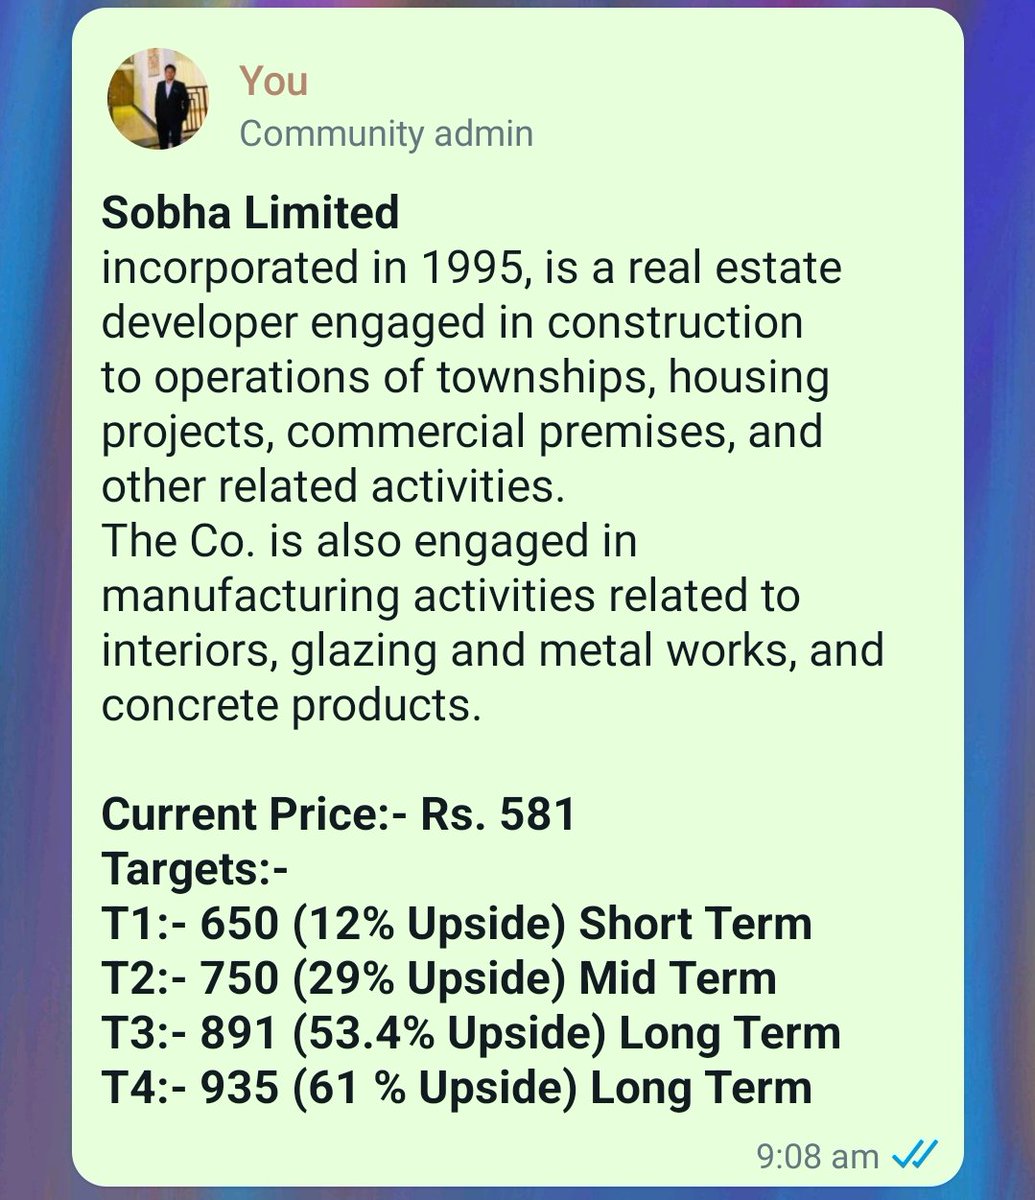 We recommend SOBHA Limited a leading real estate company in India, at ₹581 per share. Today, it hit all the targets with a 62% return in just 3 months. 🚀📈
#Sobha #stockmarkets #Targethit